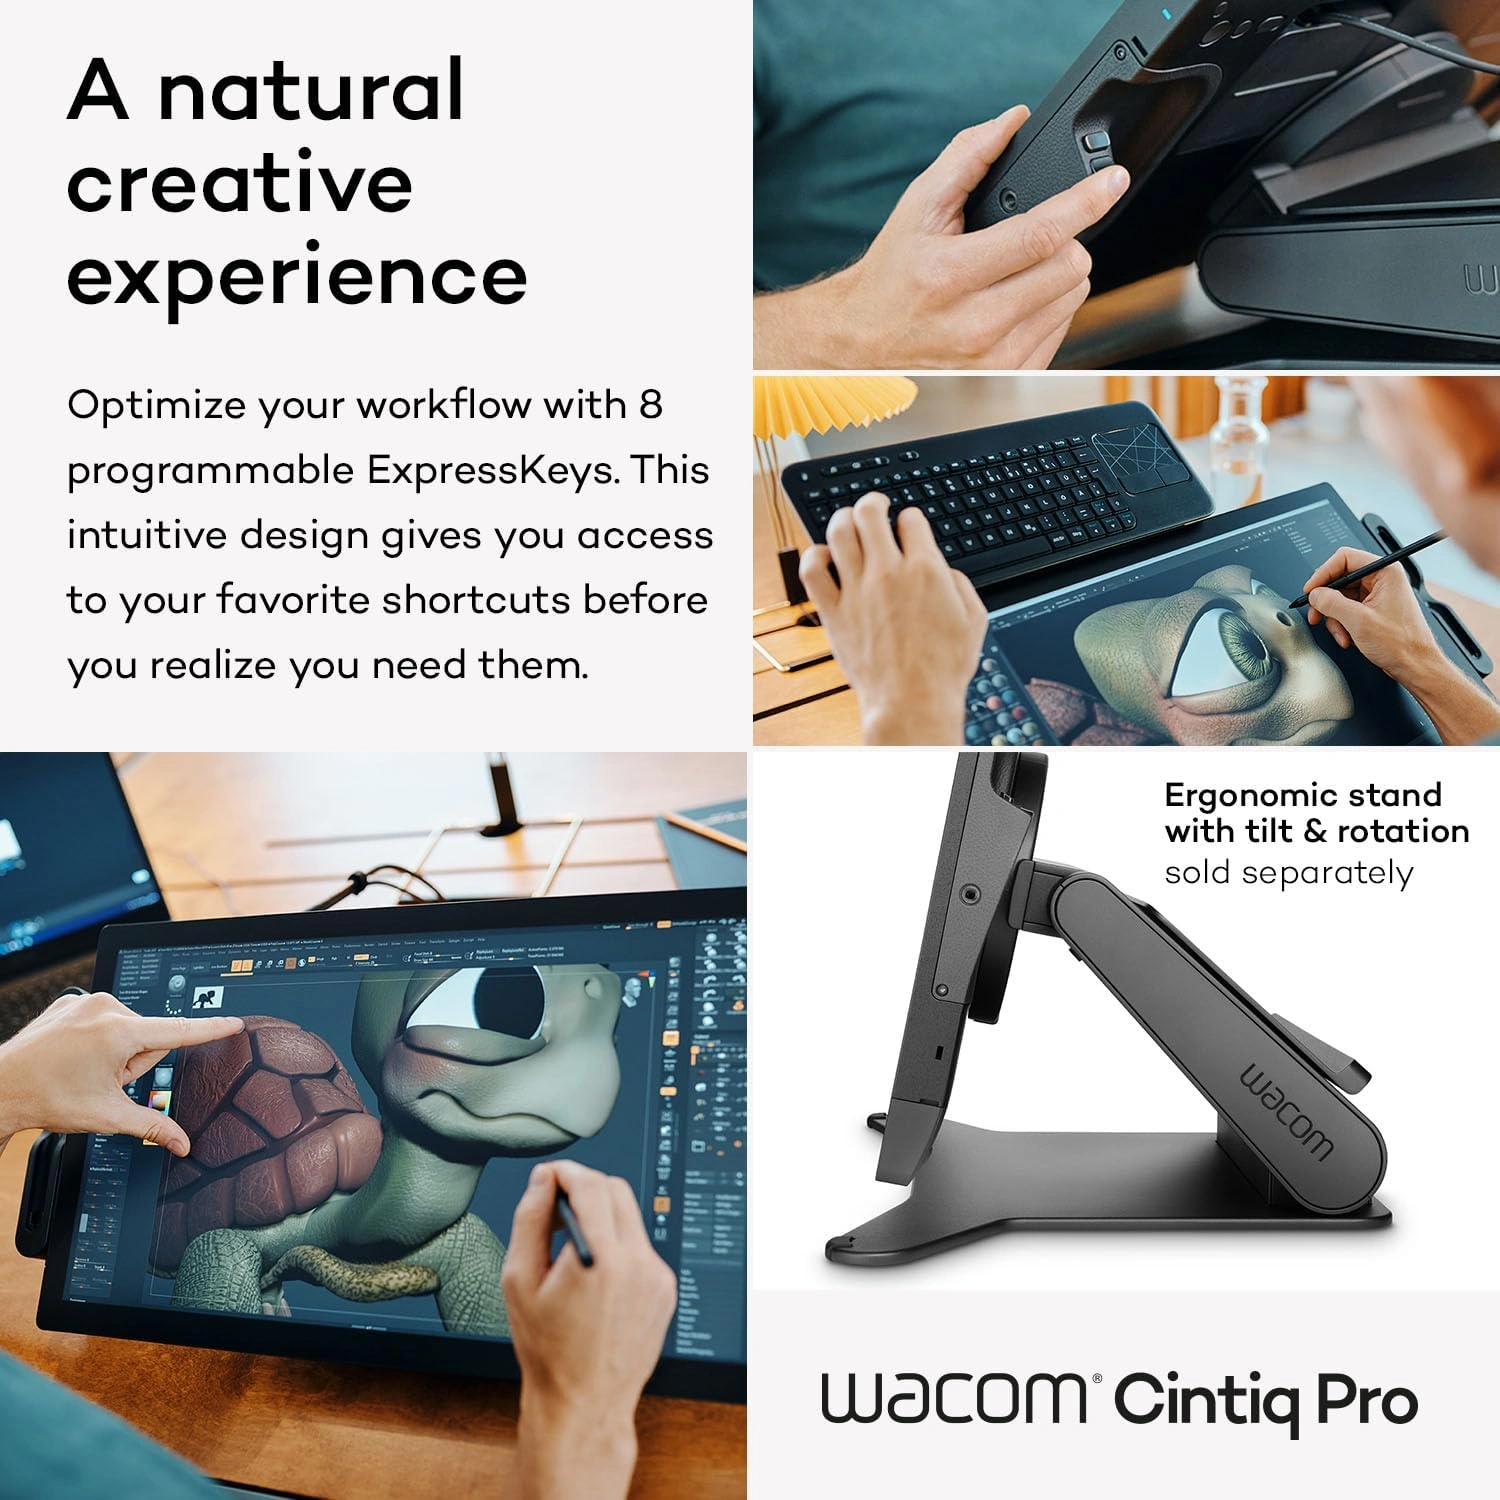 Wacom Cintiq Pro 22 Drawing Tablet with Screen; 4K UHD Touchscreen Graphic Drawing Monitor with 1.07 Billion Colors, 120Hz Refresh Rate &amp; 8192 Pen Pressure for Windows PC, Mac, Linux-3